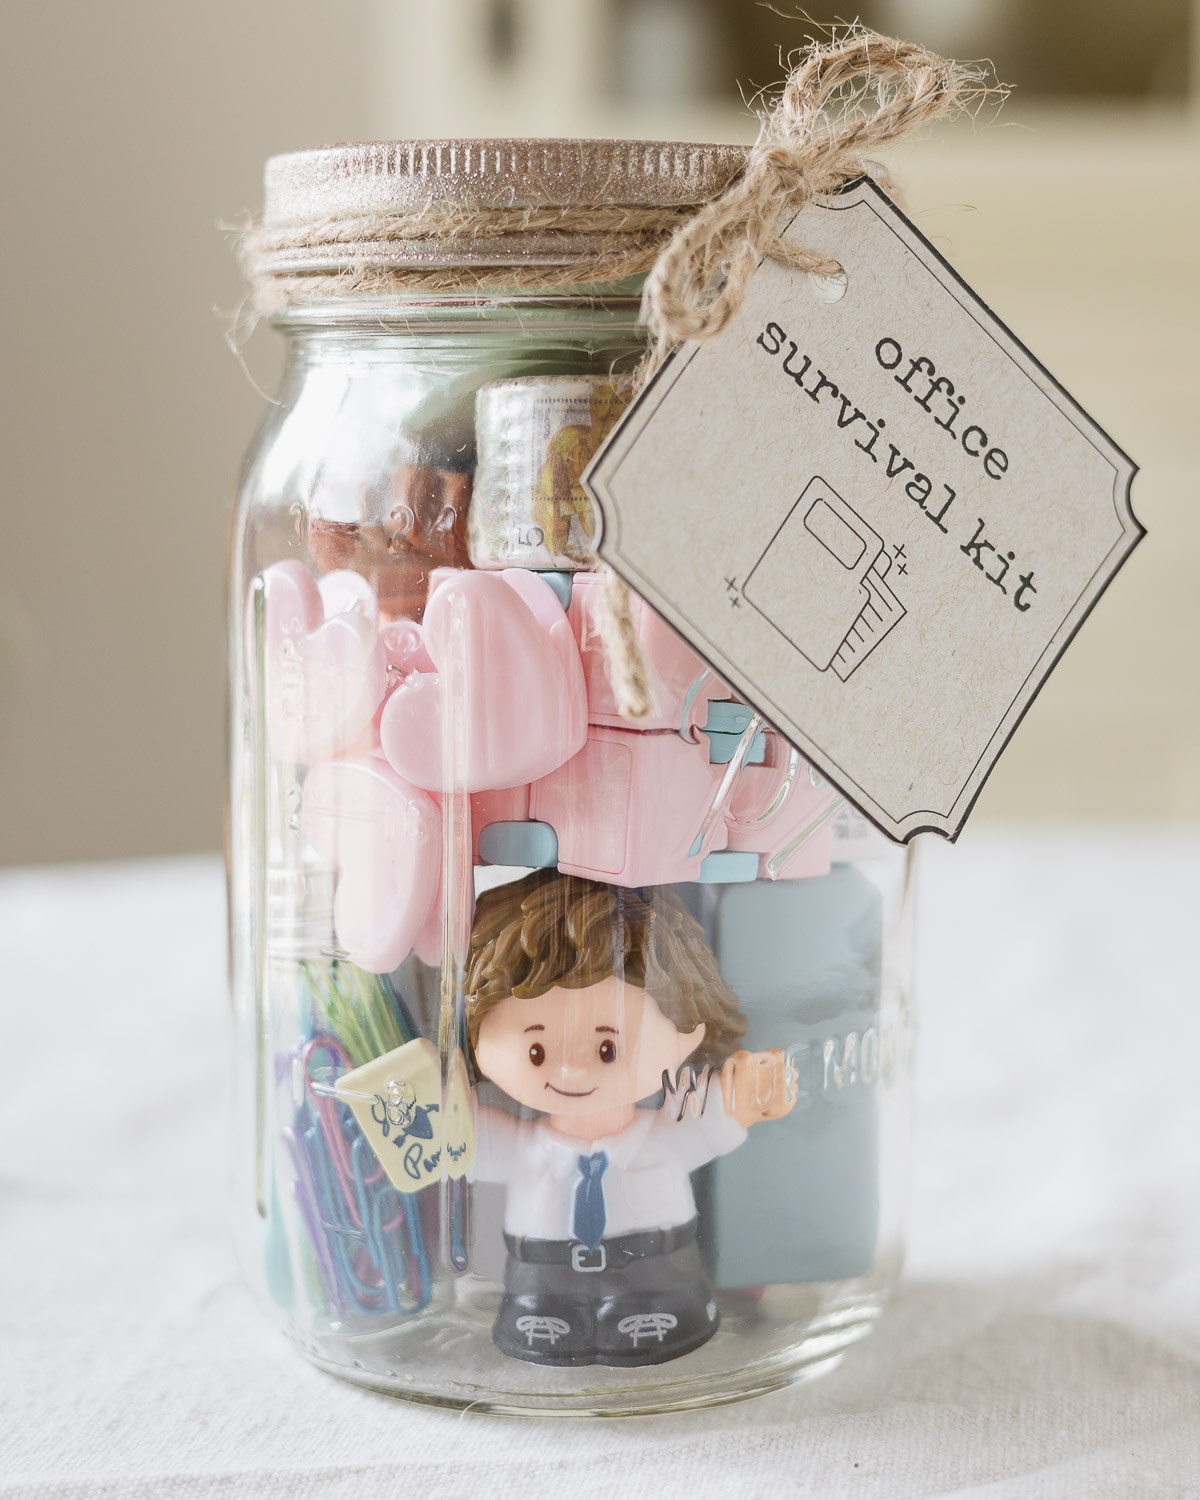 A mason jar filled with office supplies, a "Jim" figurine from The Office and a tag that reads, "Office Survival Kit".